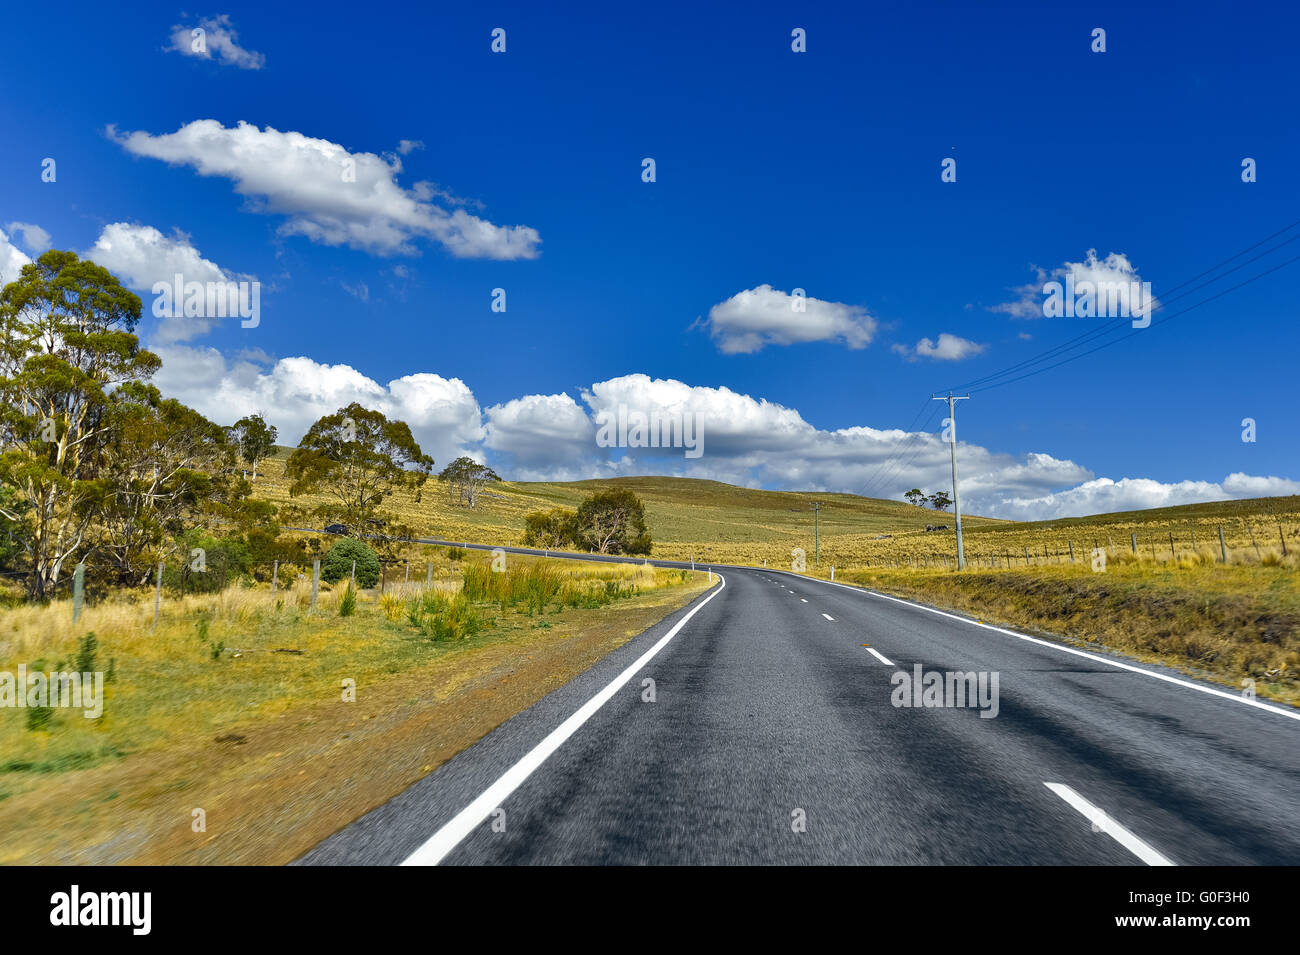 Road at countryside with blue sky and clouds, Tasmania, Australia Stock Photo